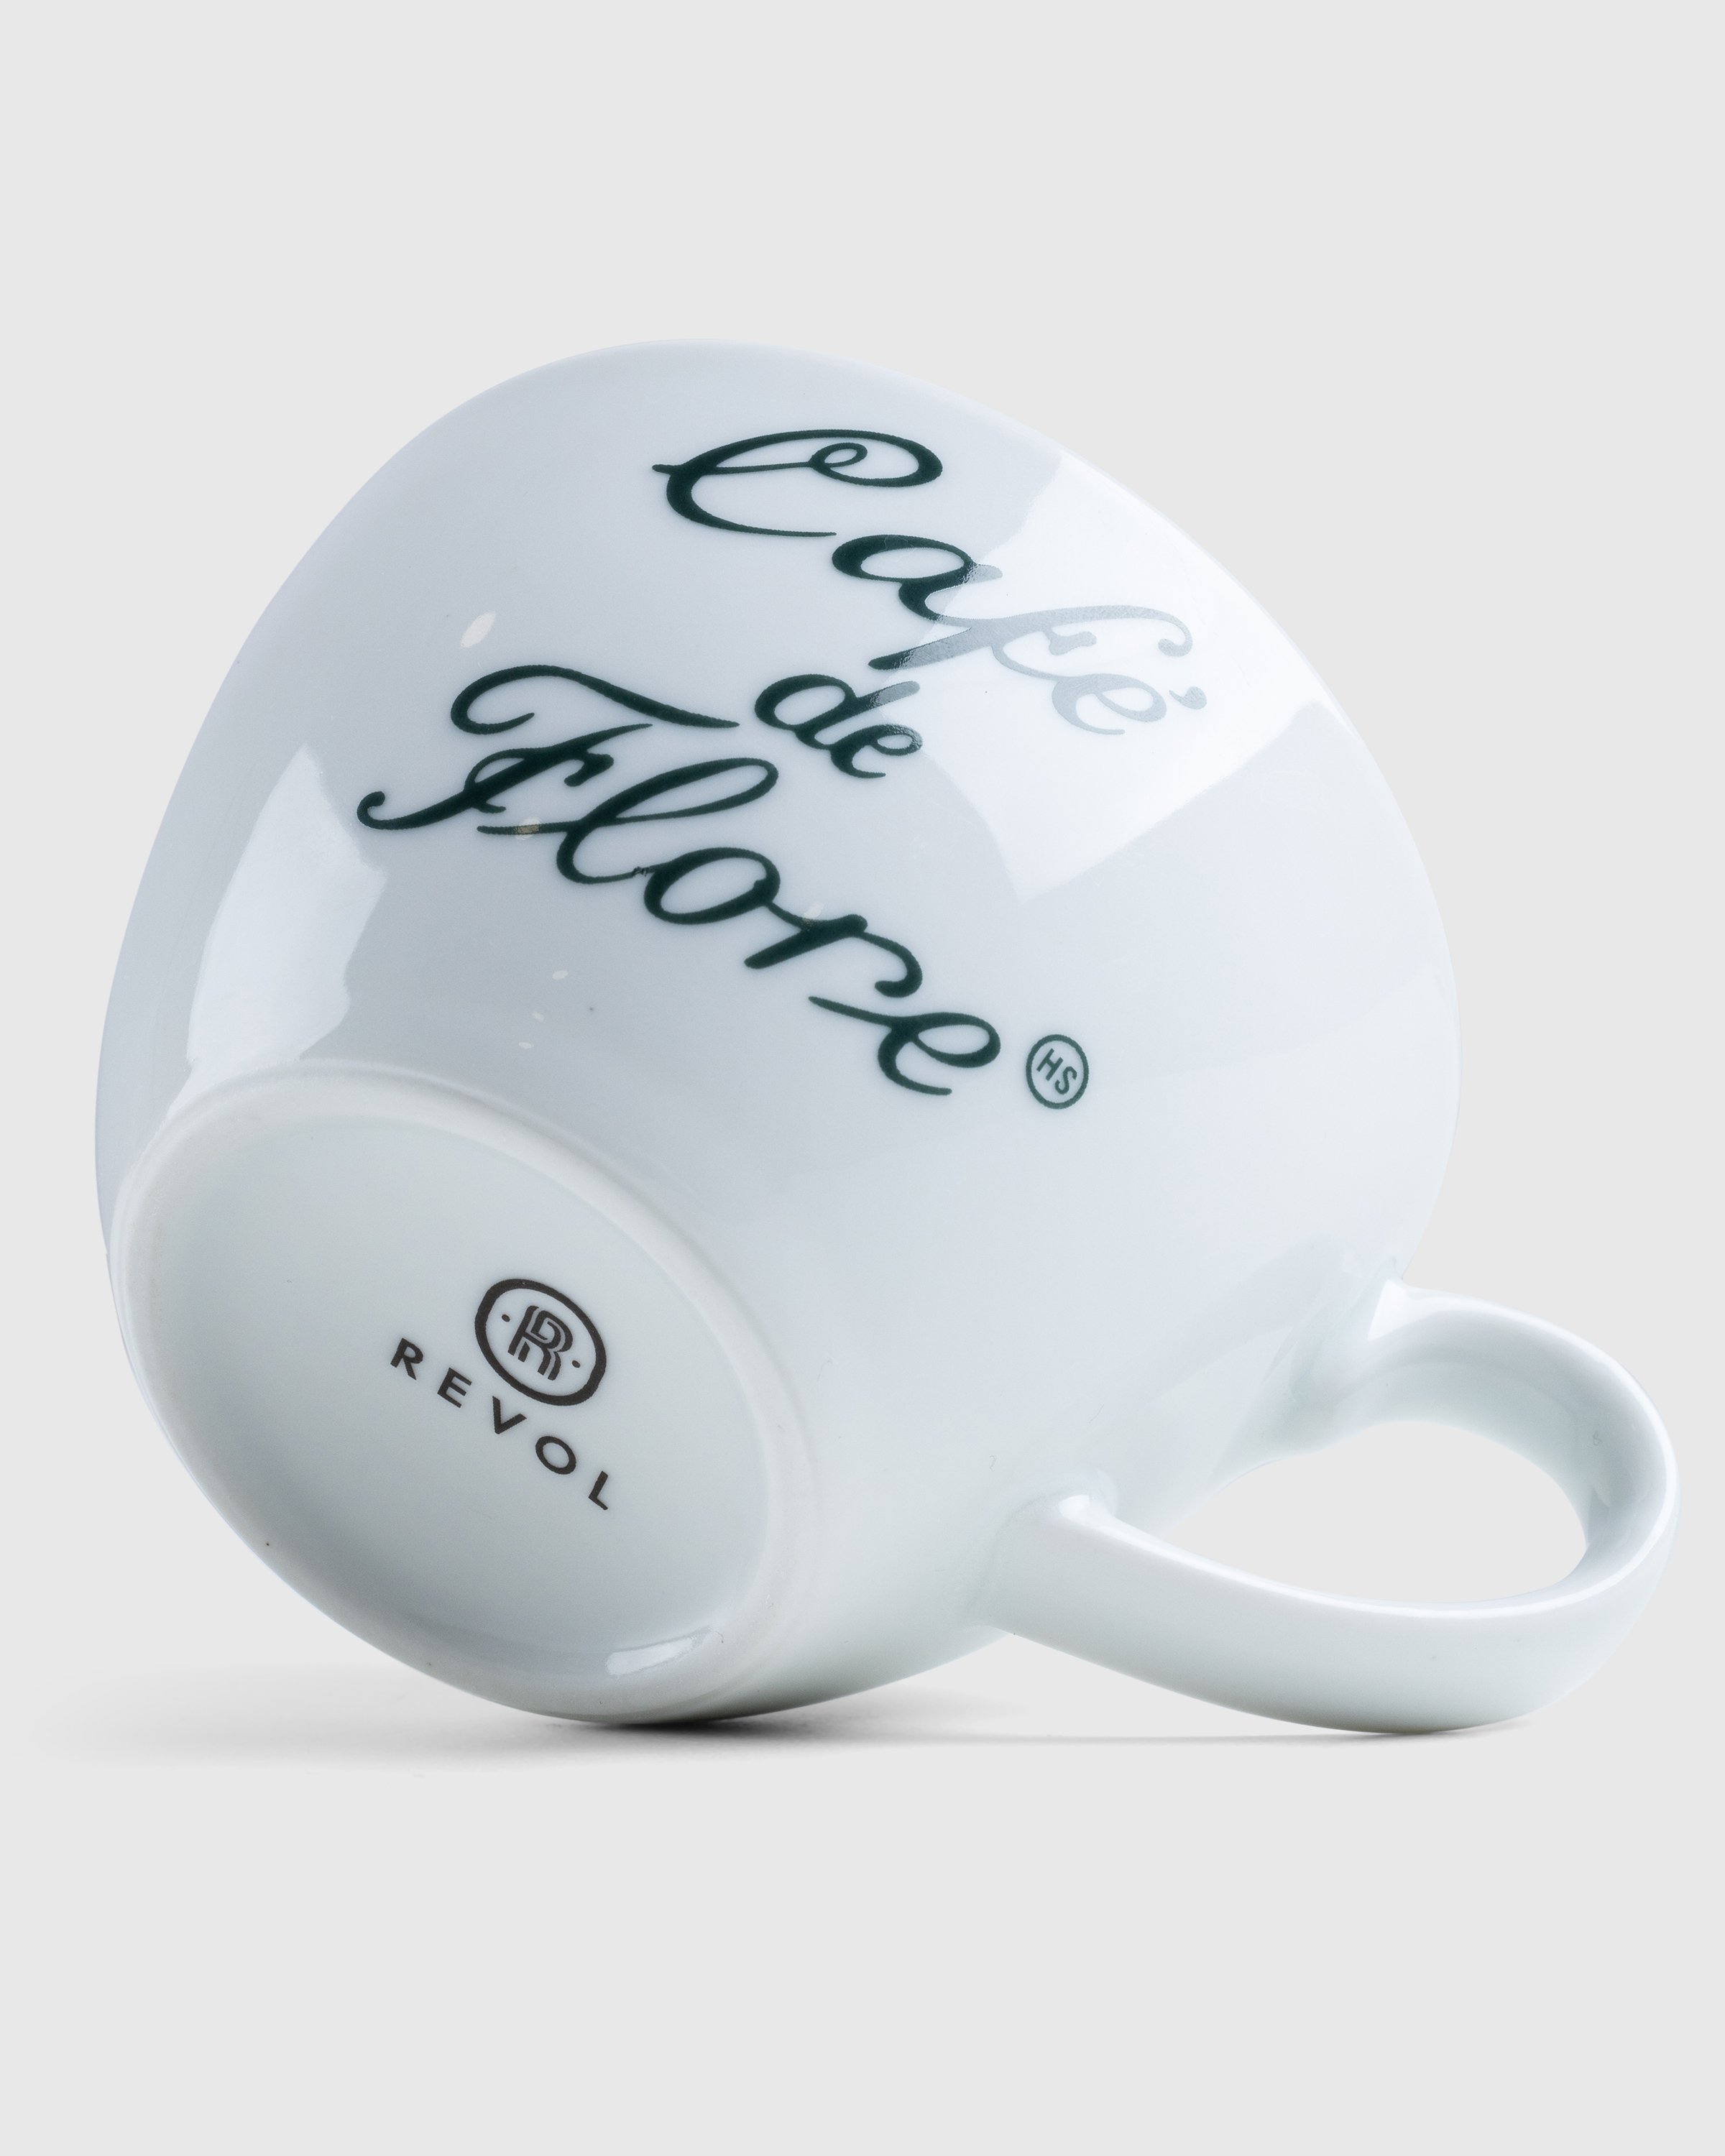 Café de Flore x Highsnobiety - Breakfast Cup and Saucer - Lifestyle - White - Image 5